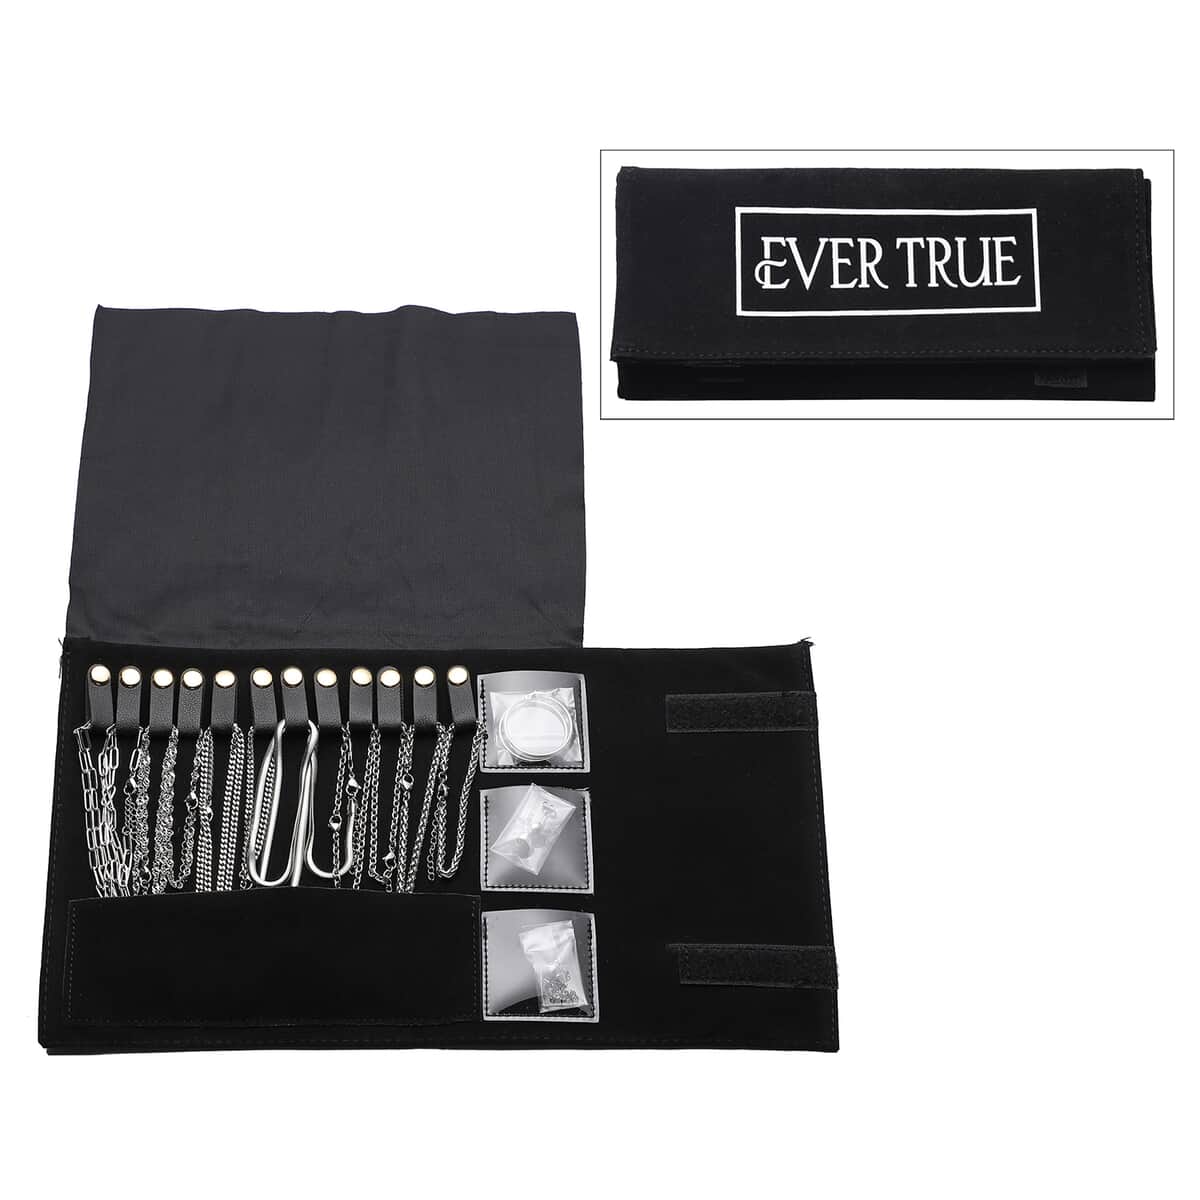 Mother’s Day Gift Ever True 15 Pieces Jewelry Set, Set of Necklace, Bracelet, Earrings, and Extender, 18K White Gold Plated Stainless Steel Jewelry Set, Free Velvet Travel Organizer pouch image number 0